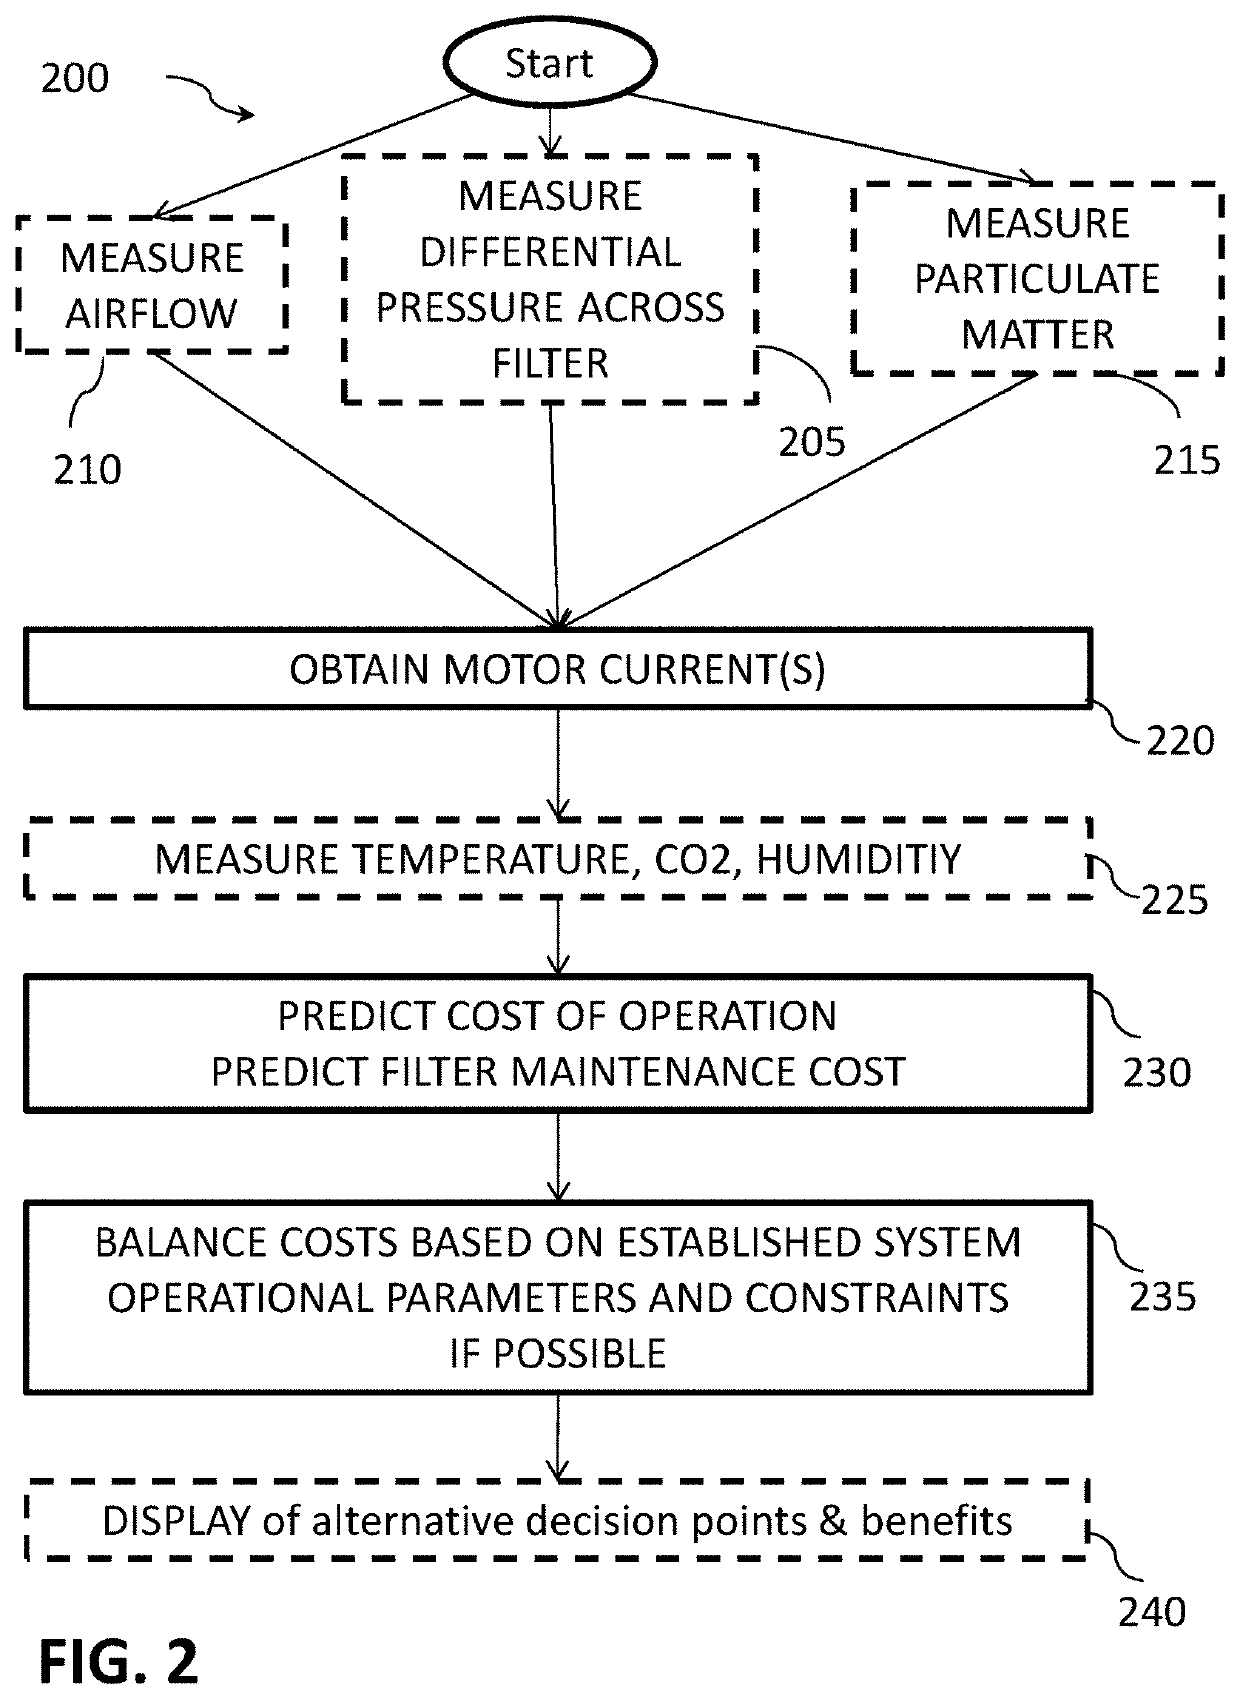 A condition based energy smart air circulation system